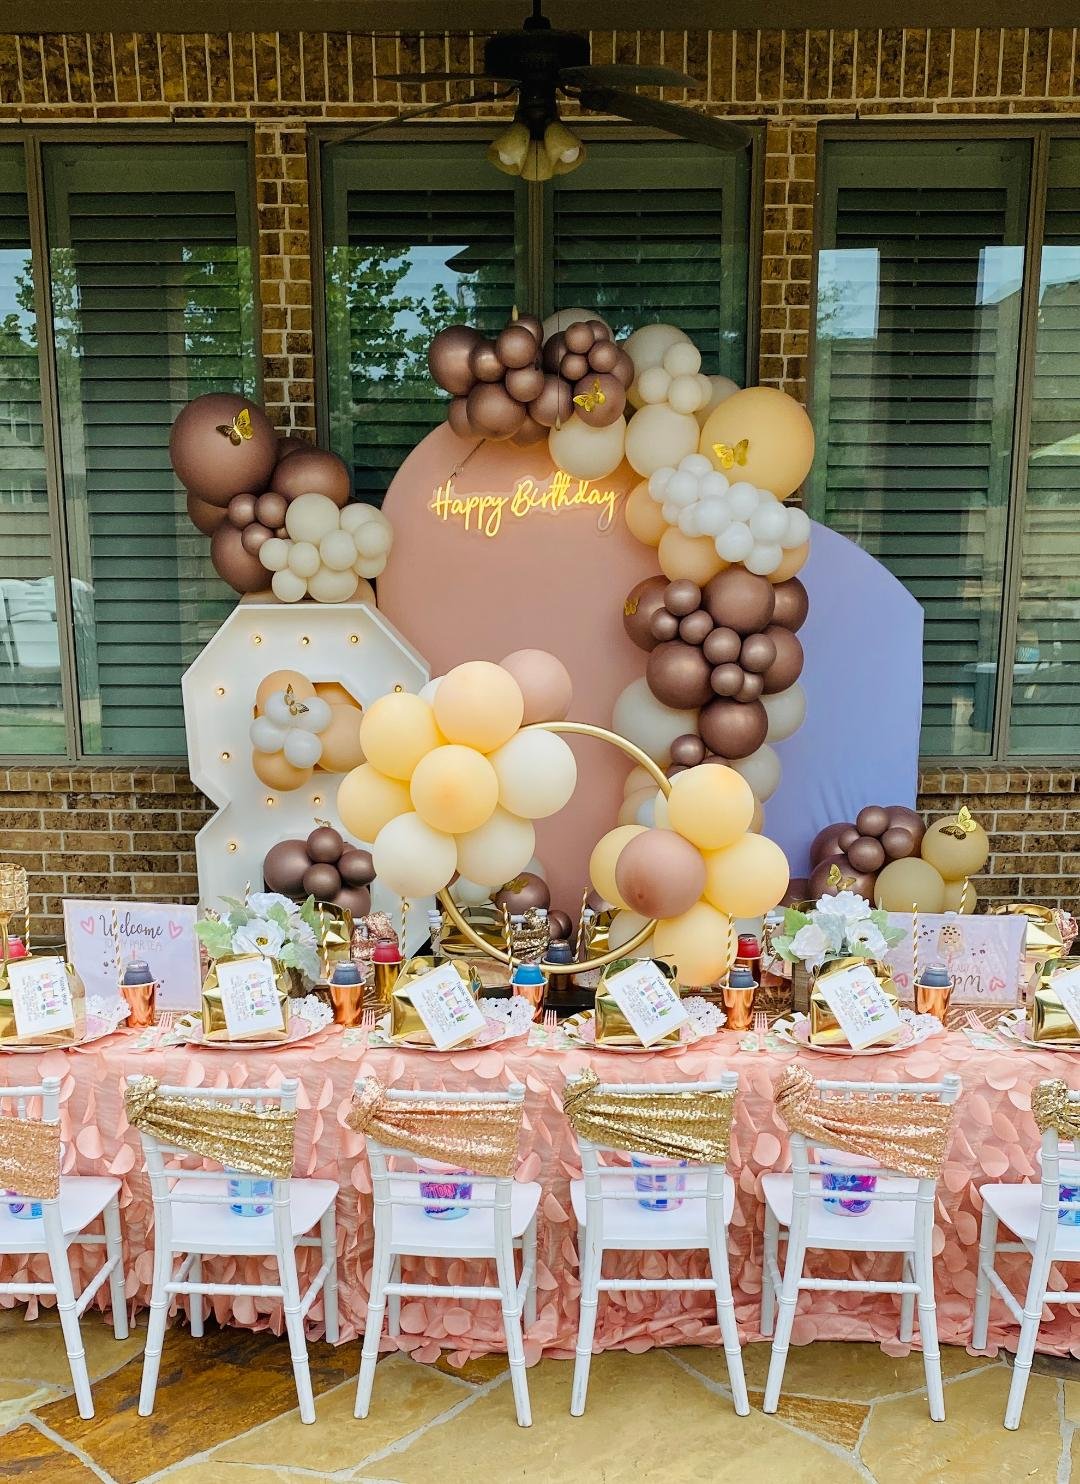 houston kids birthday party balloons focal points backdrops tables chairs.jpg